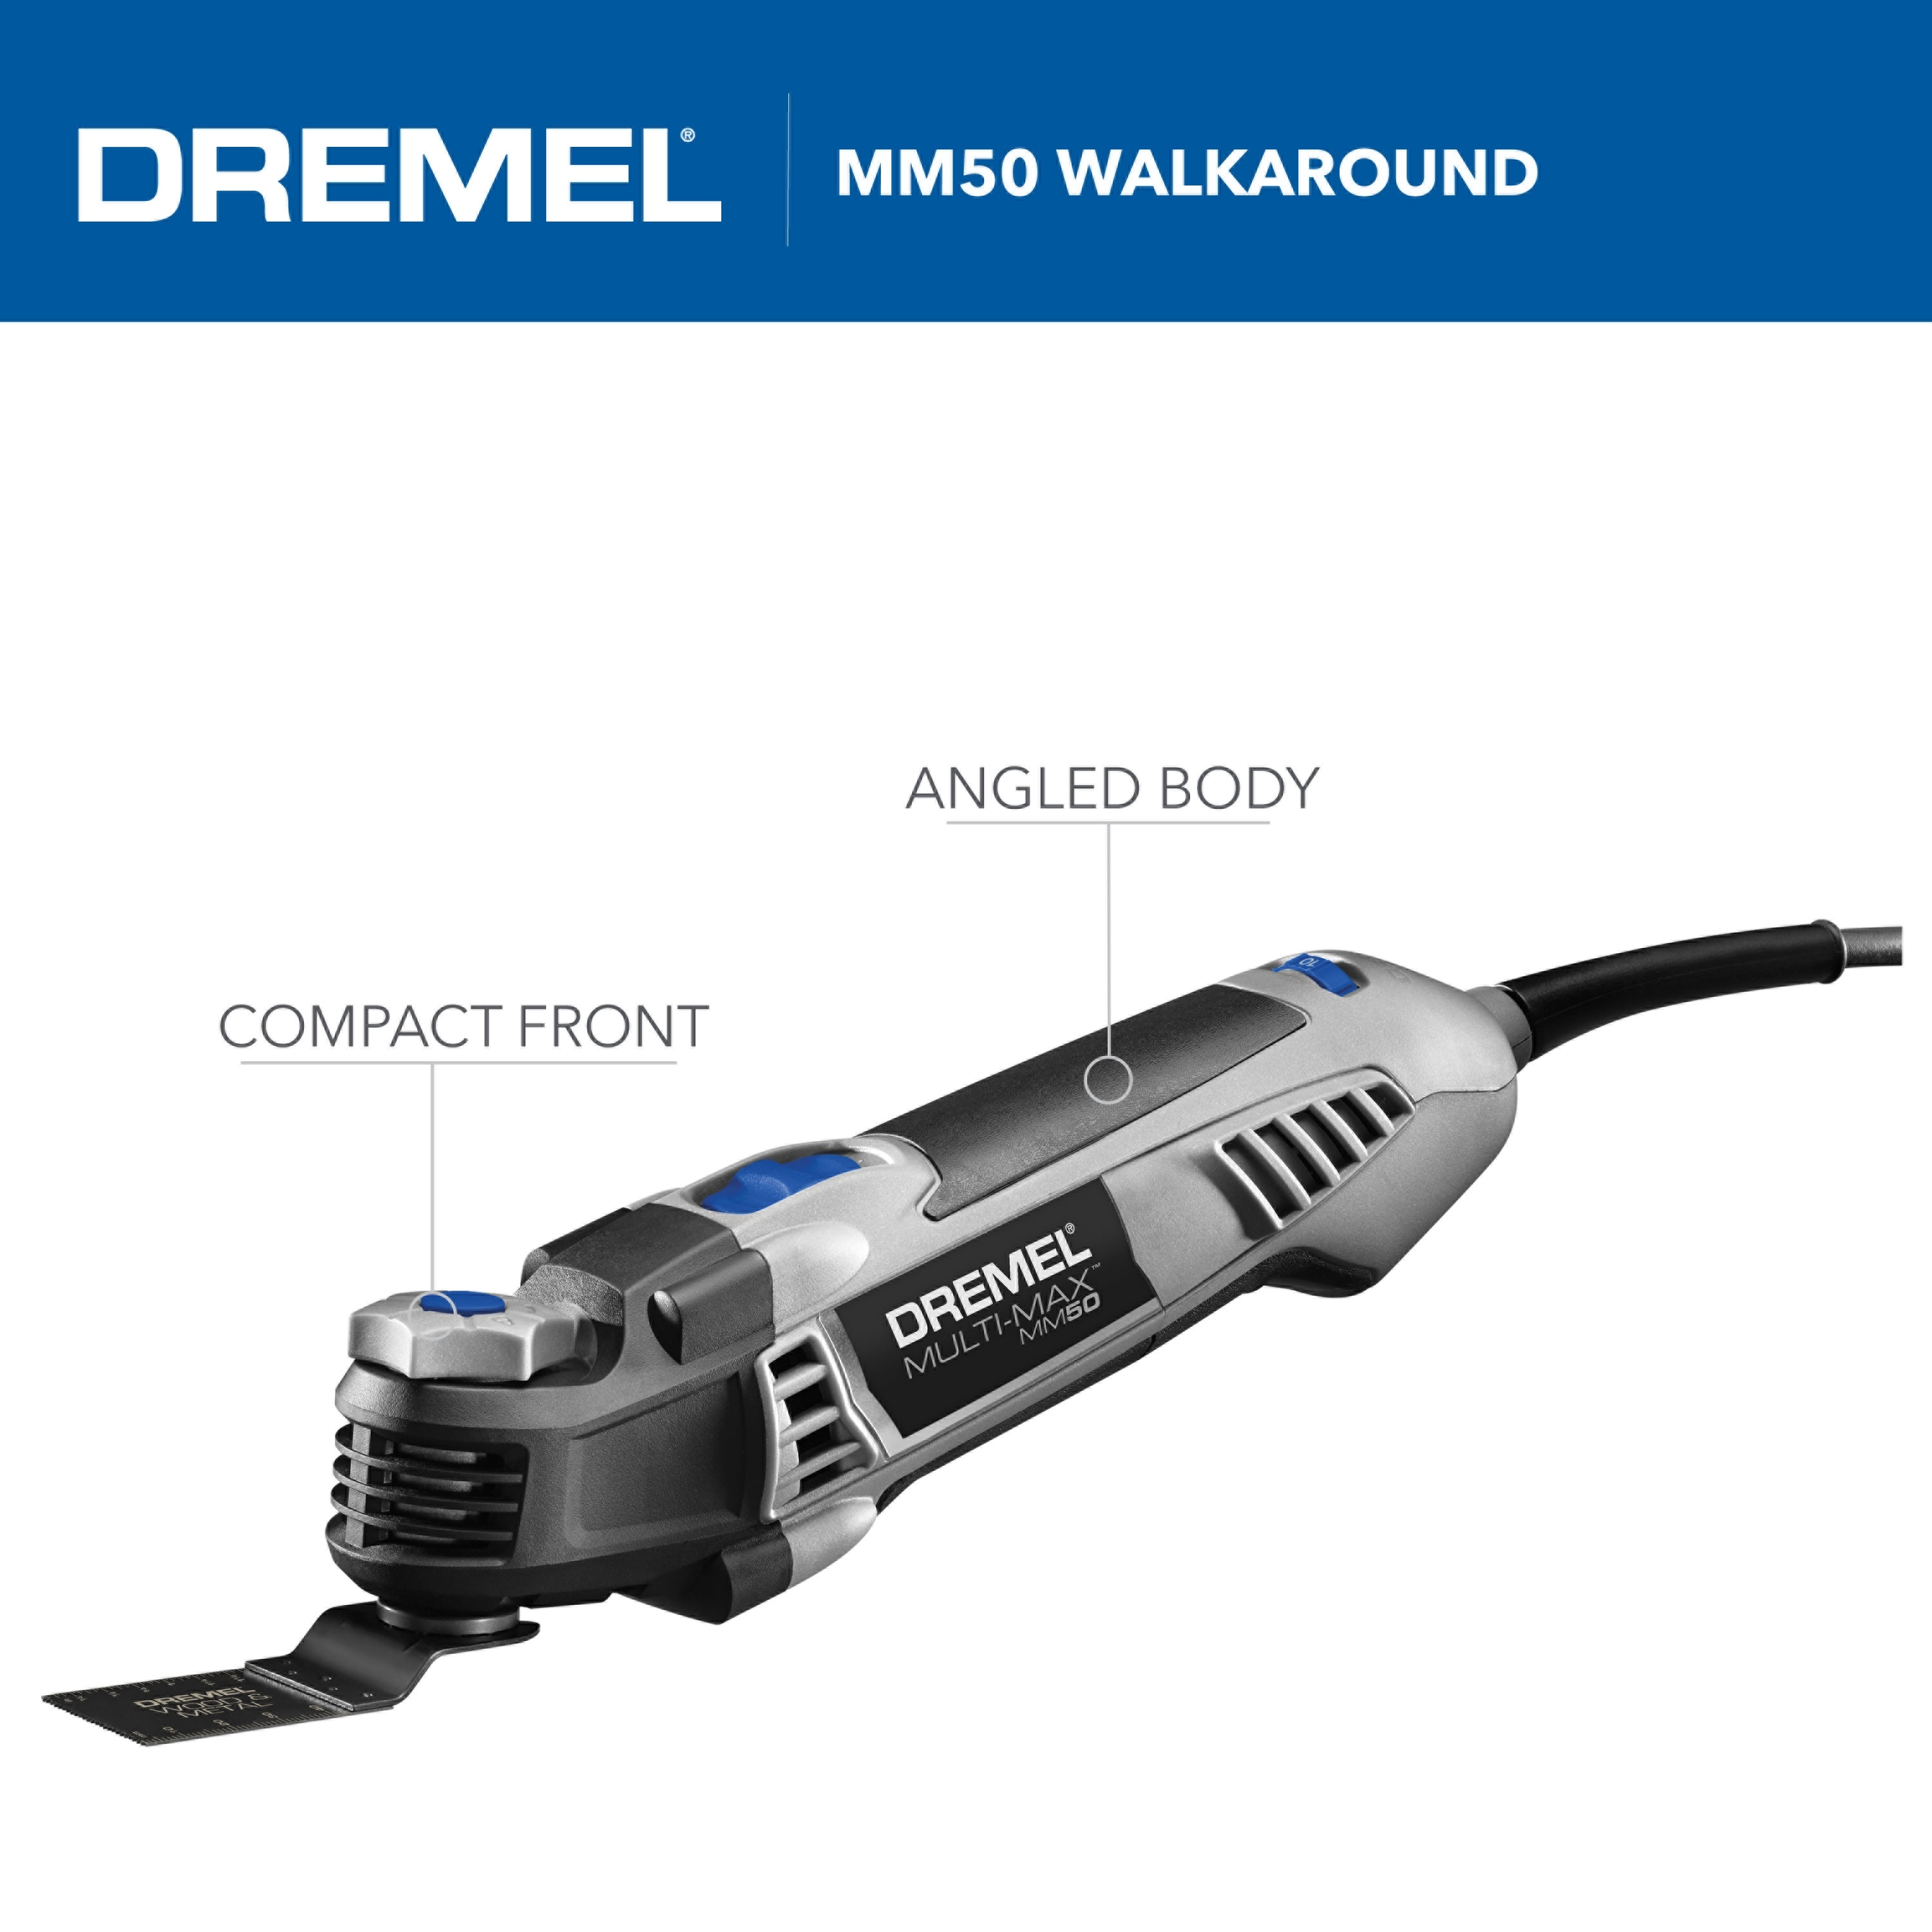 21 Weird Things To Do With A Dremel Tool!  Dremel projects, Dremel tool,  Things to do with a dremel